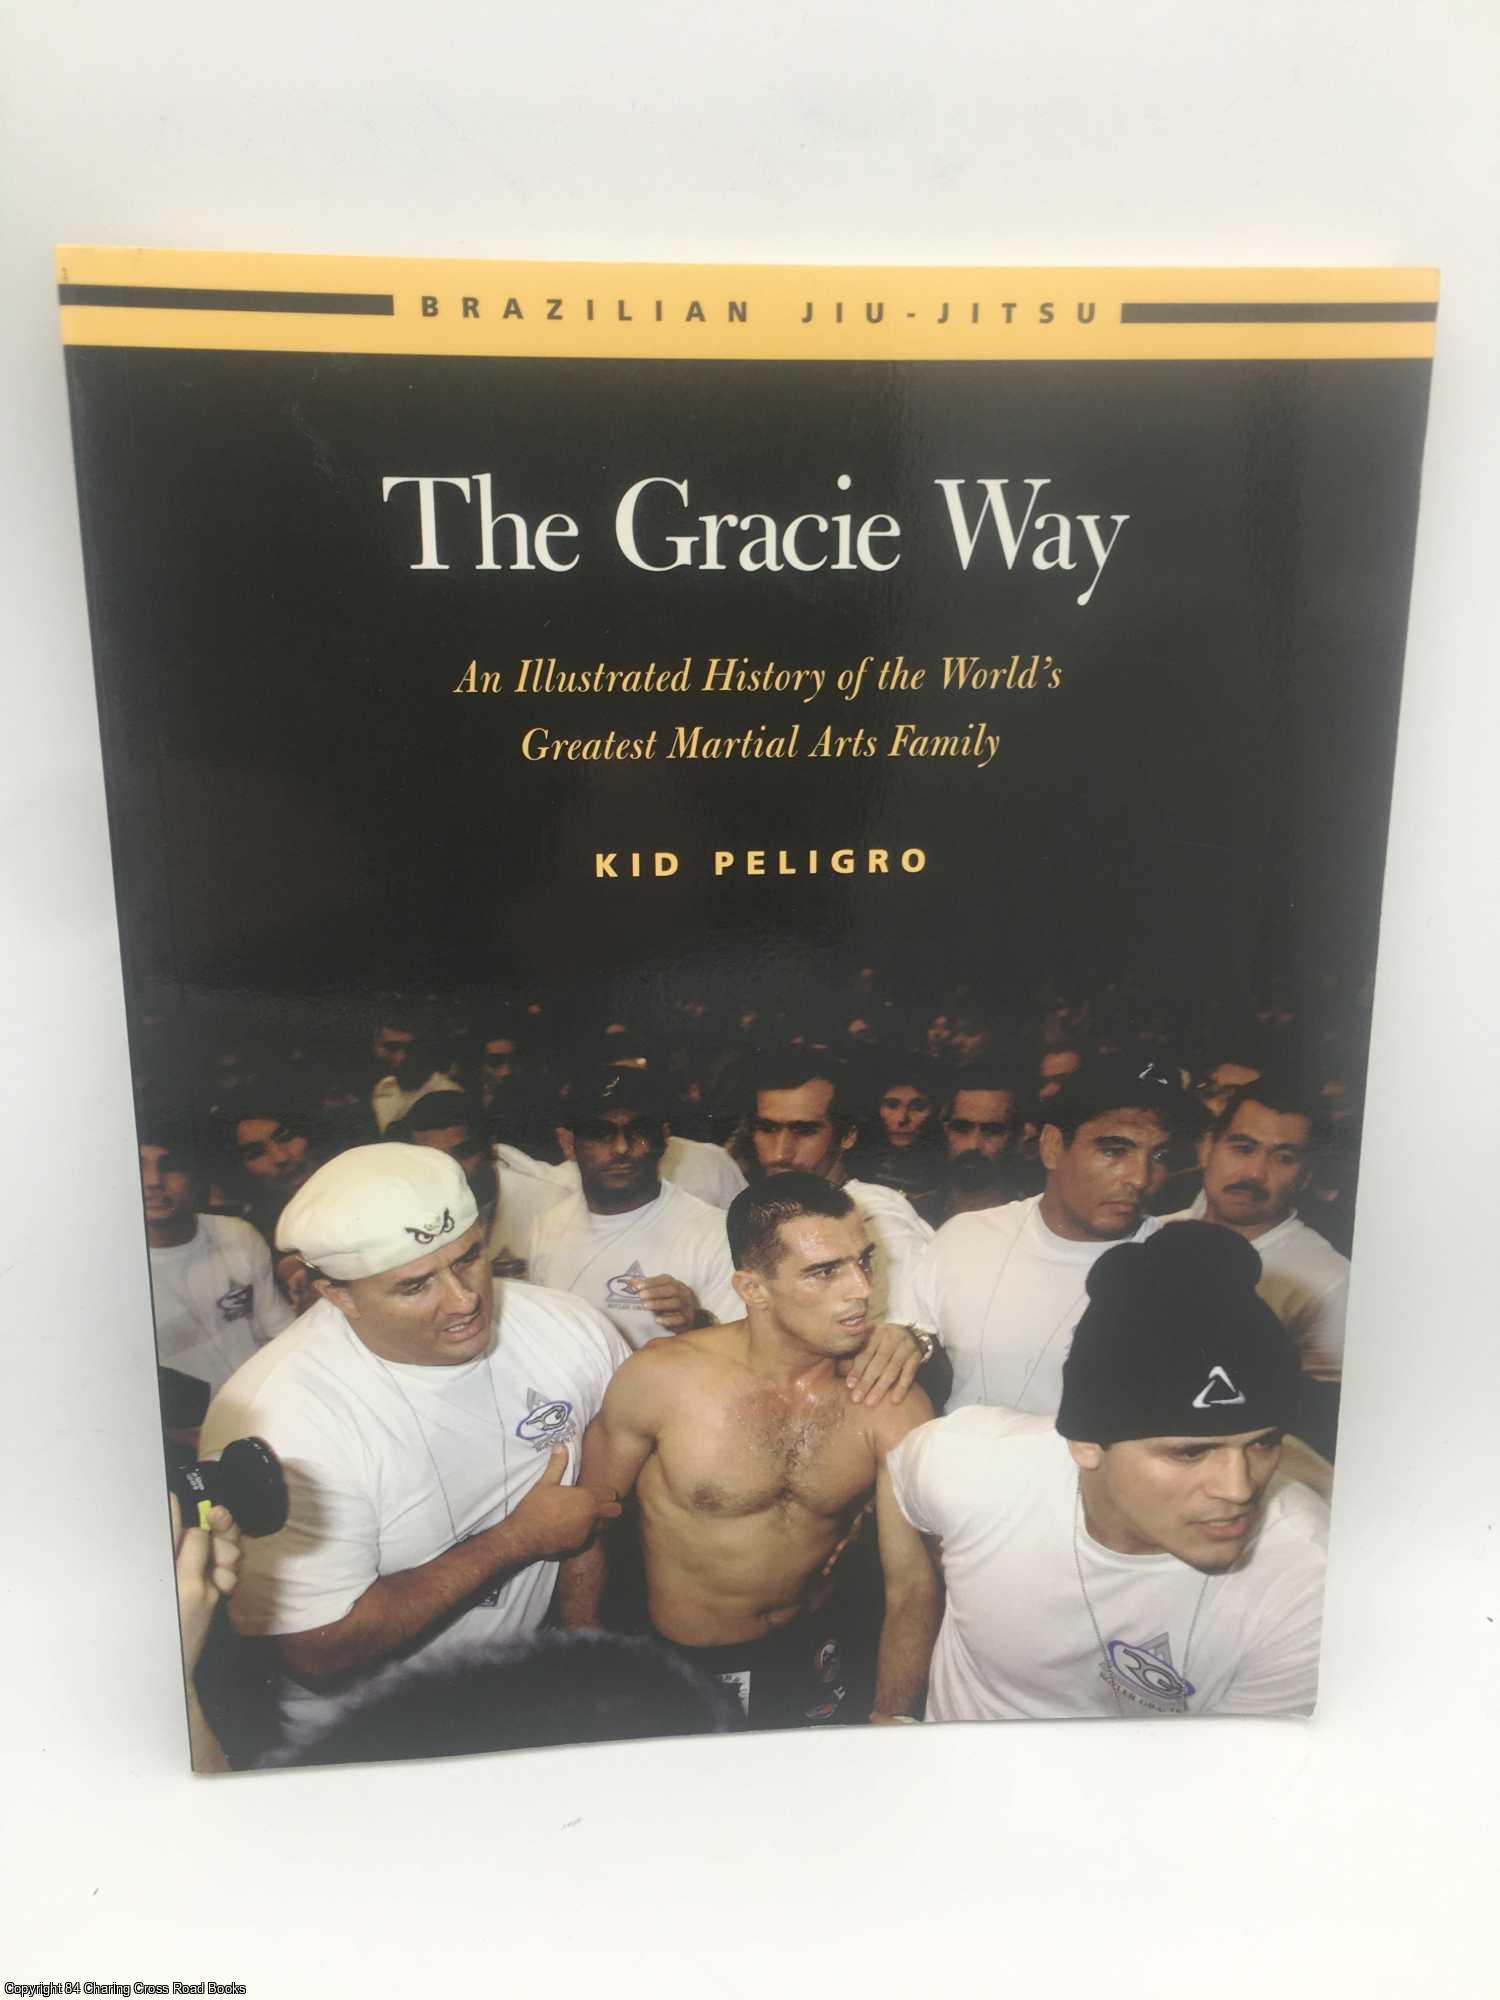 Peligro, Kid - The Gracie Way: An Illustrated History of the World's Greatest Martial Arts Family